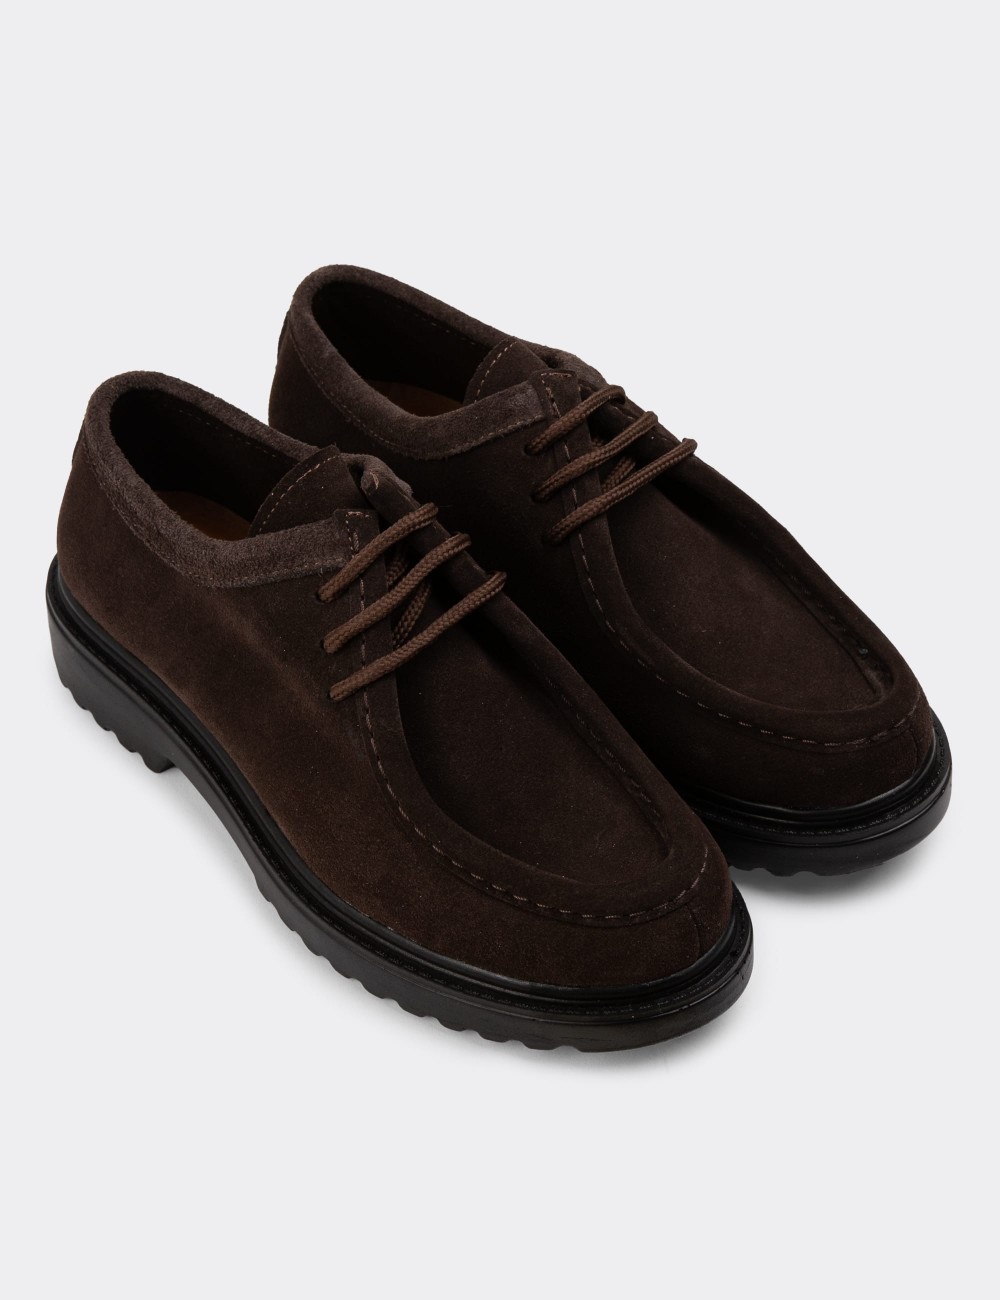 Brown Suede Leather Lace-up Shoes - 01935ZKHVC02